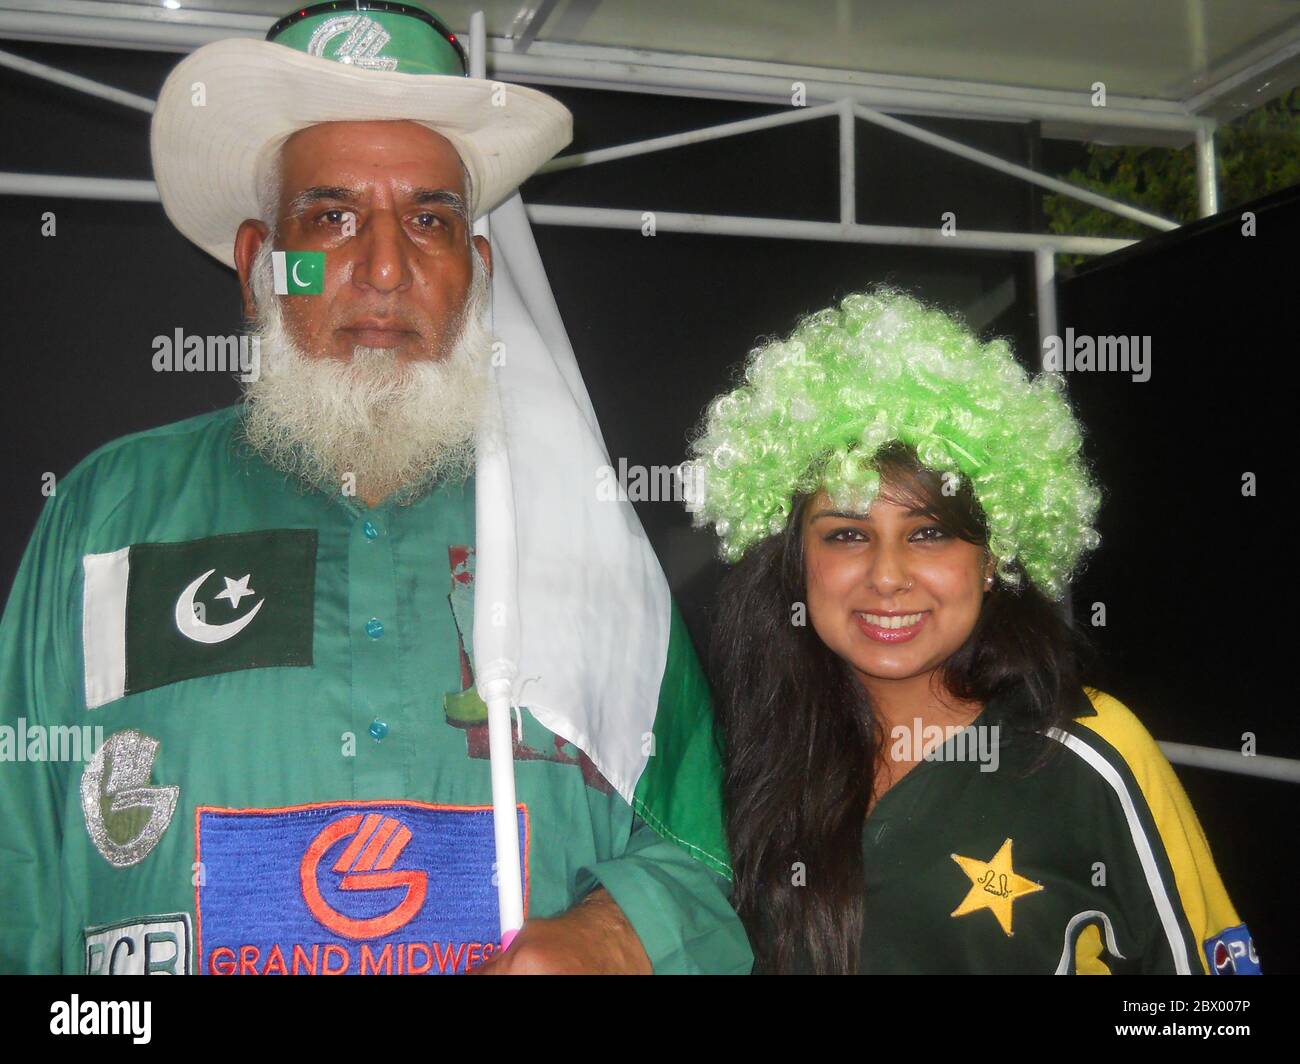 On left is Chaudhry Abdul Jalil, famously known as Chacha Cricket (Uncle Cricket), is a famous Pakistani cricket mascot. Together with another Pakistan supporter during the 2012 world T20 held in Sri Lanka. Stock Photo